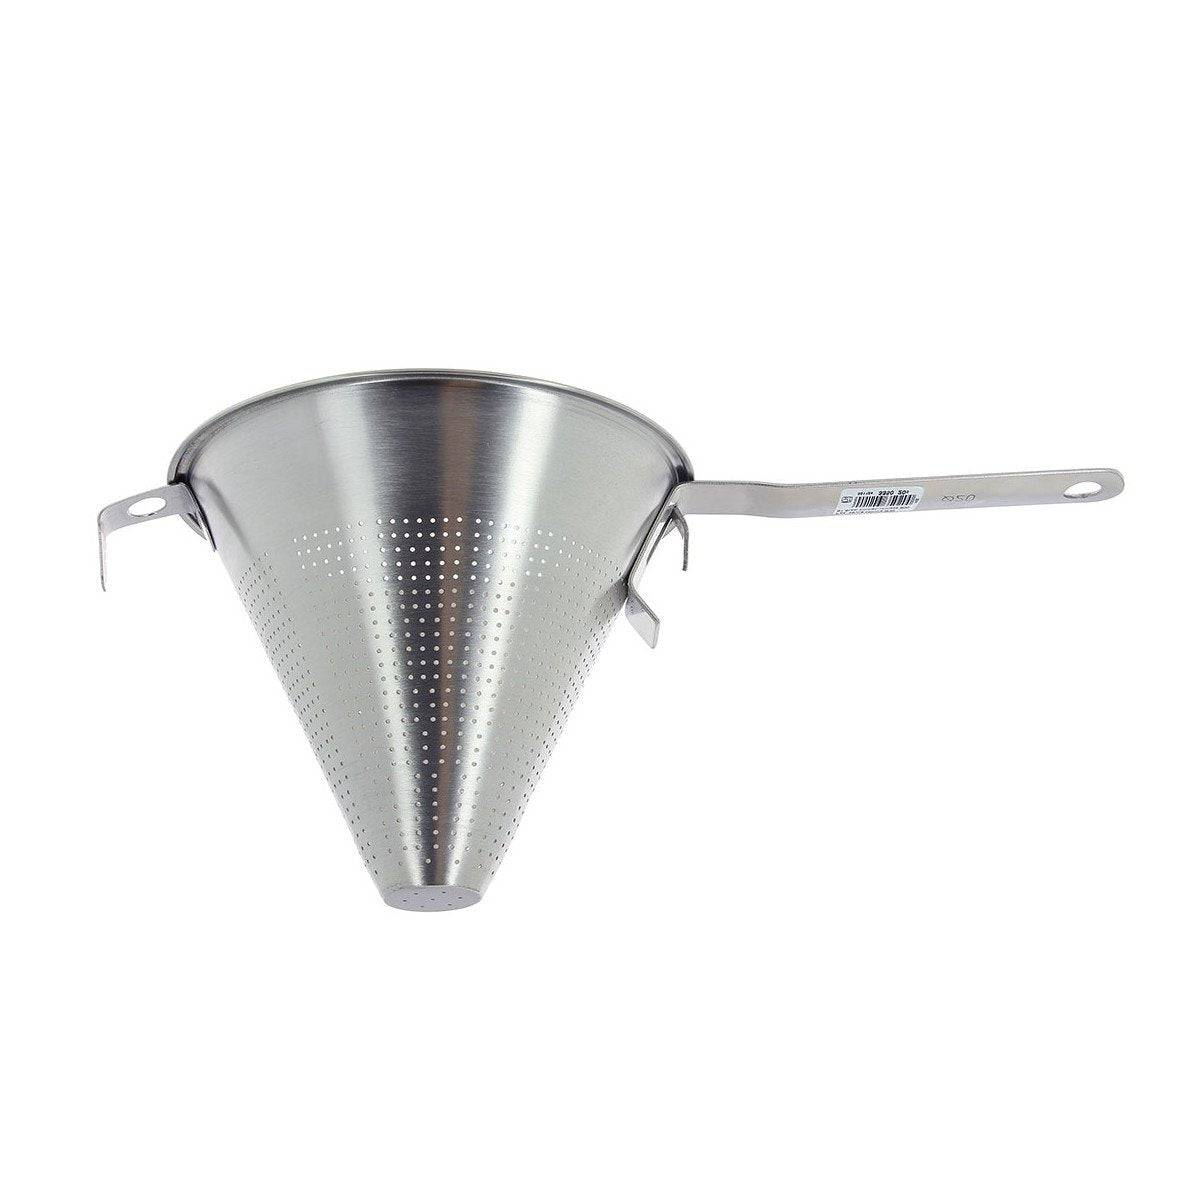 de Buyer Stainless Steel Chinese Strainer, 9-Inches - Kitchen Universe